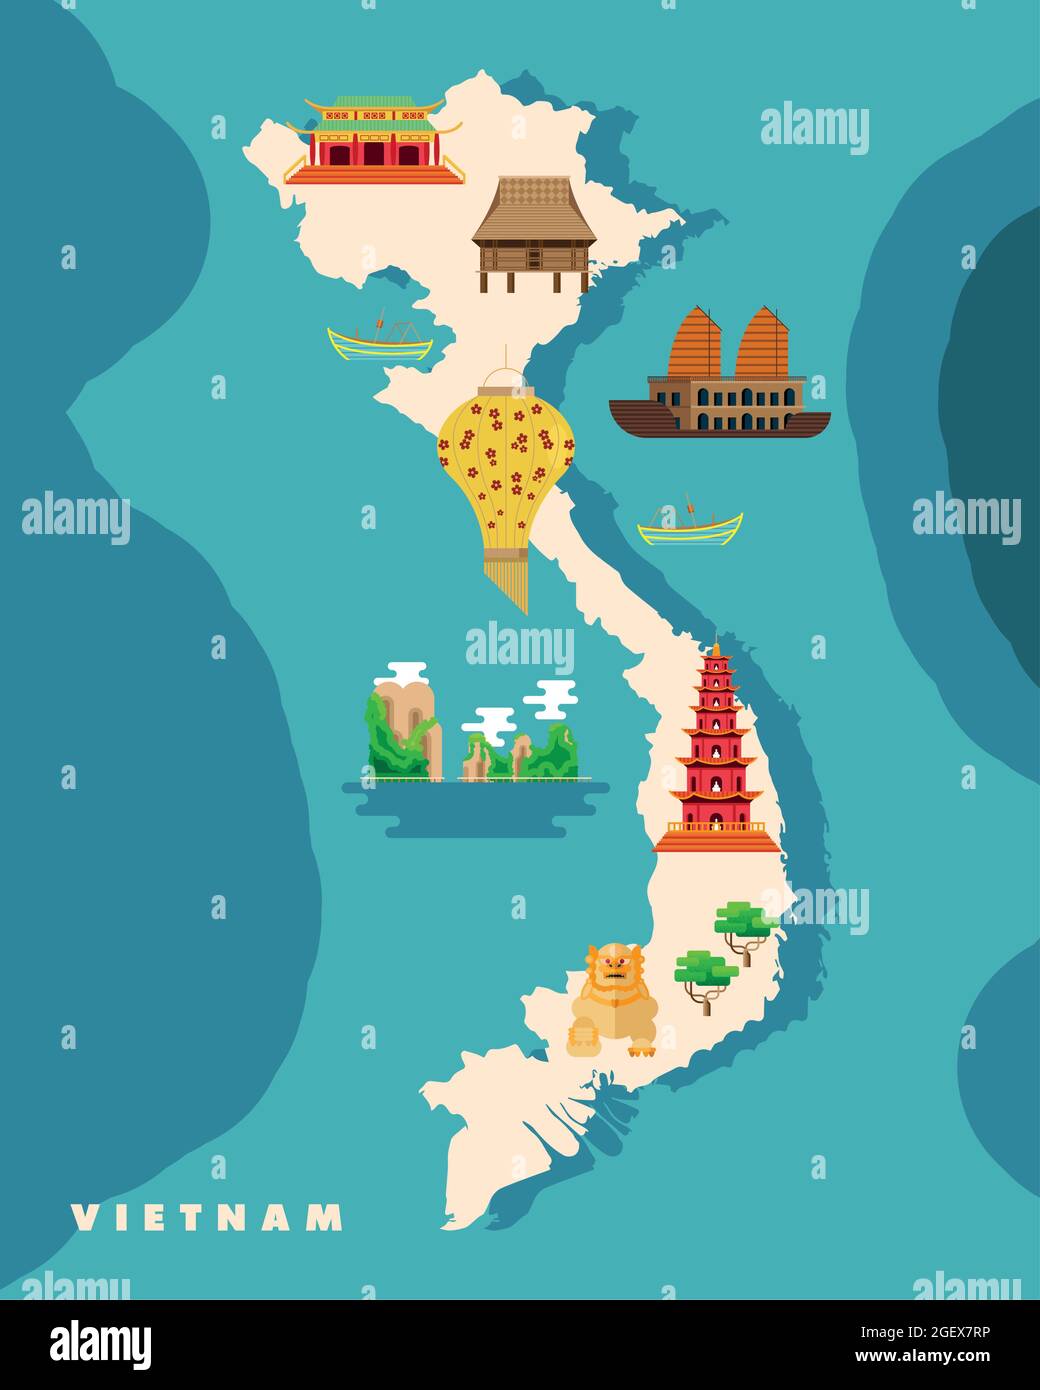 vietnam culture icons in map Stock Vector